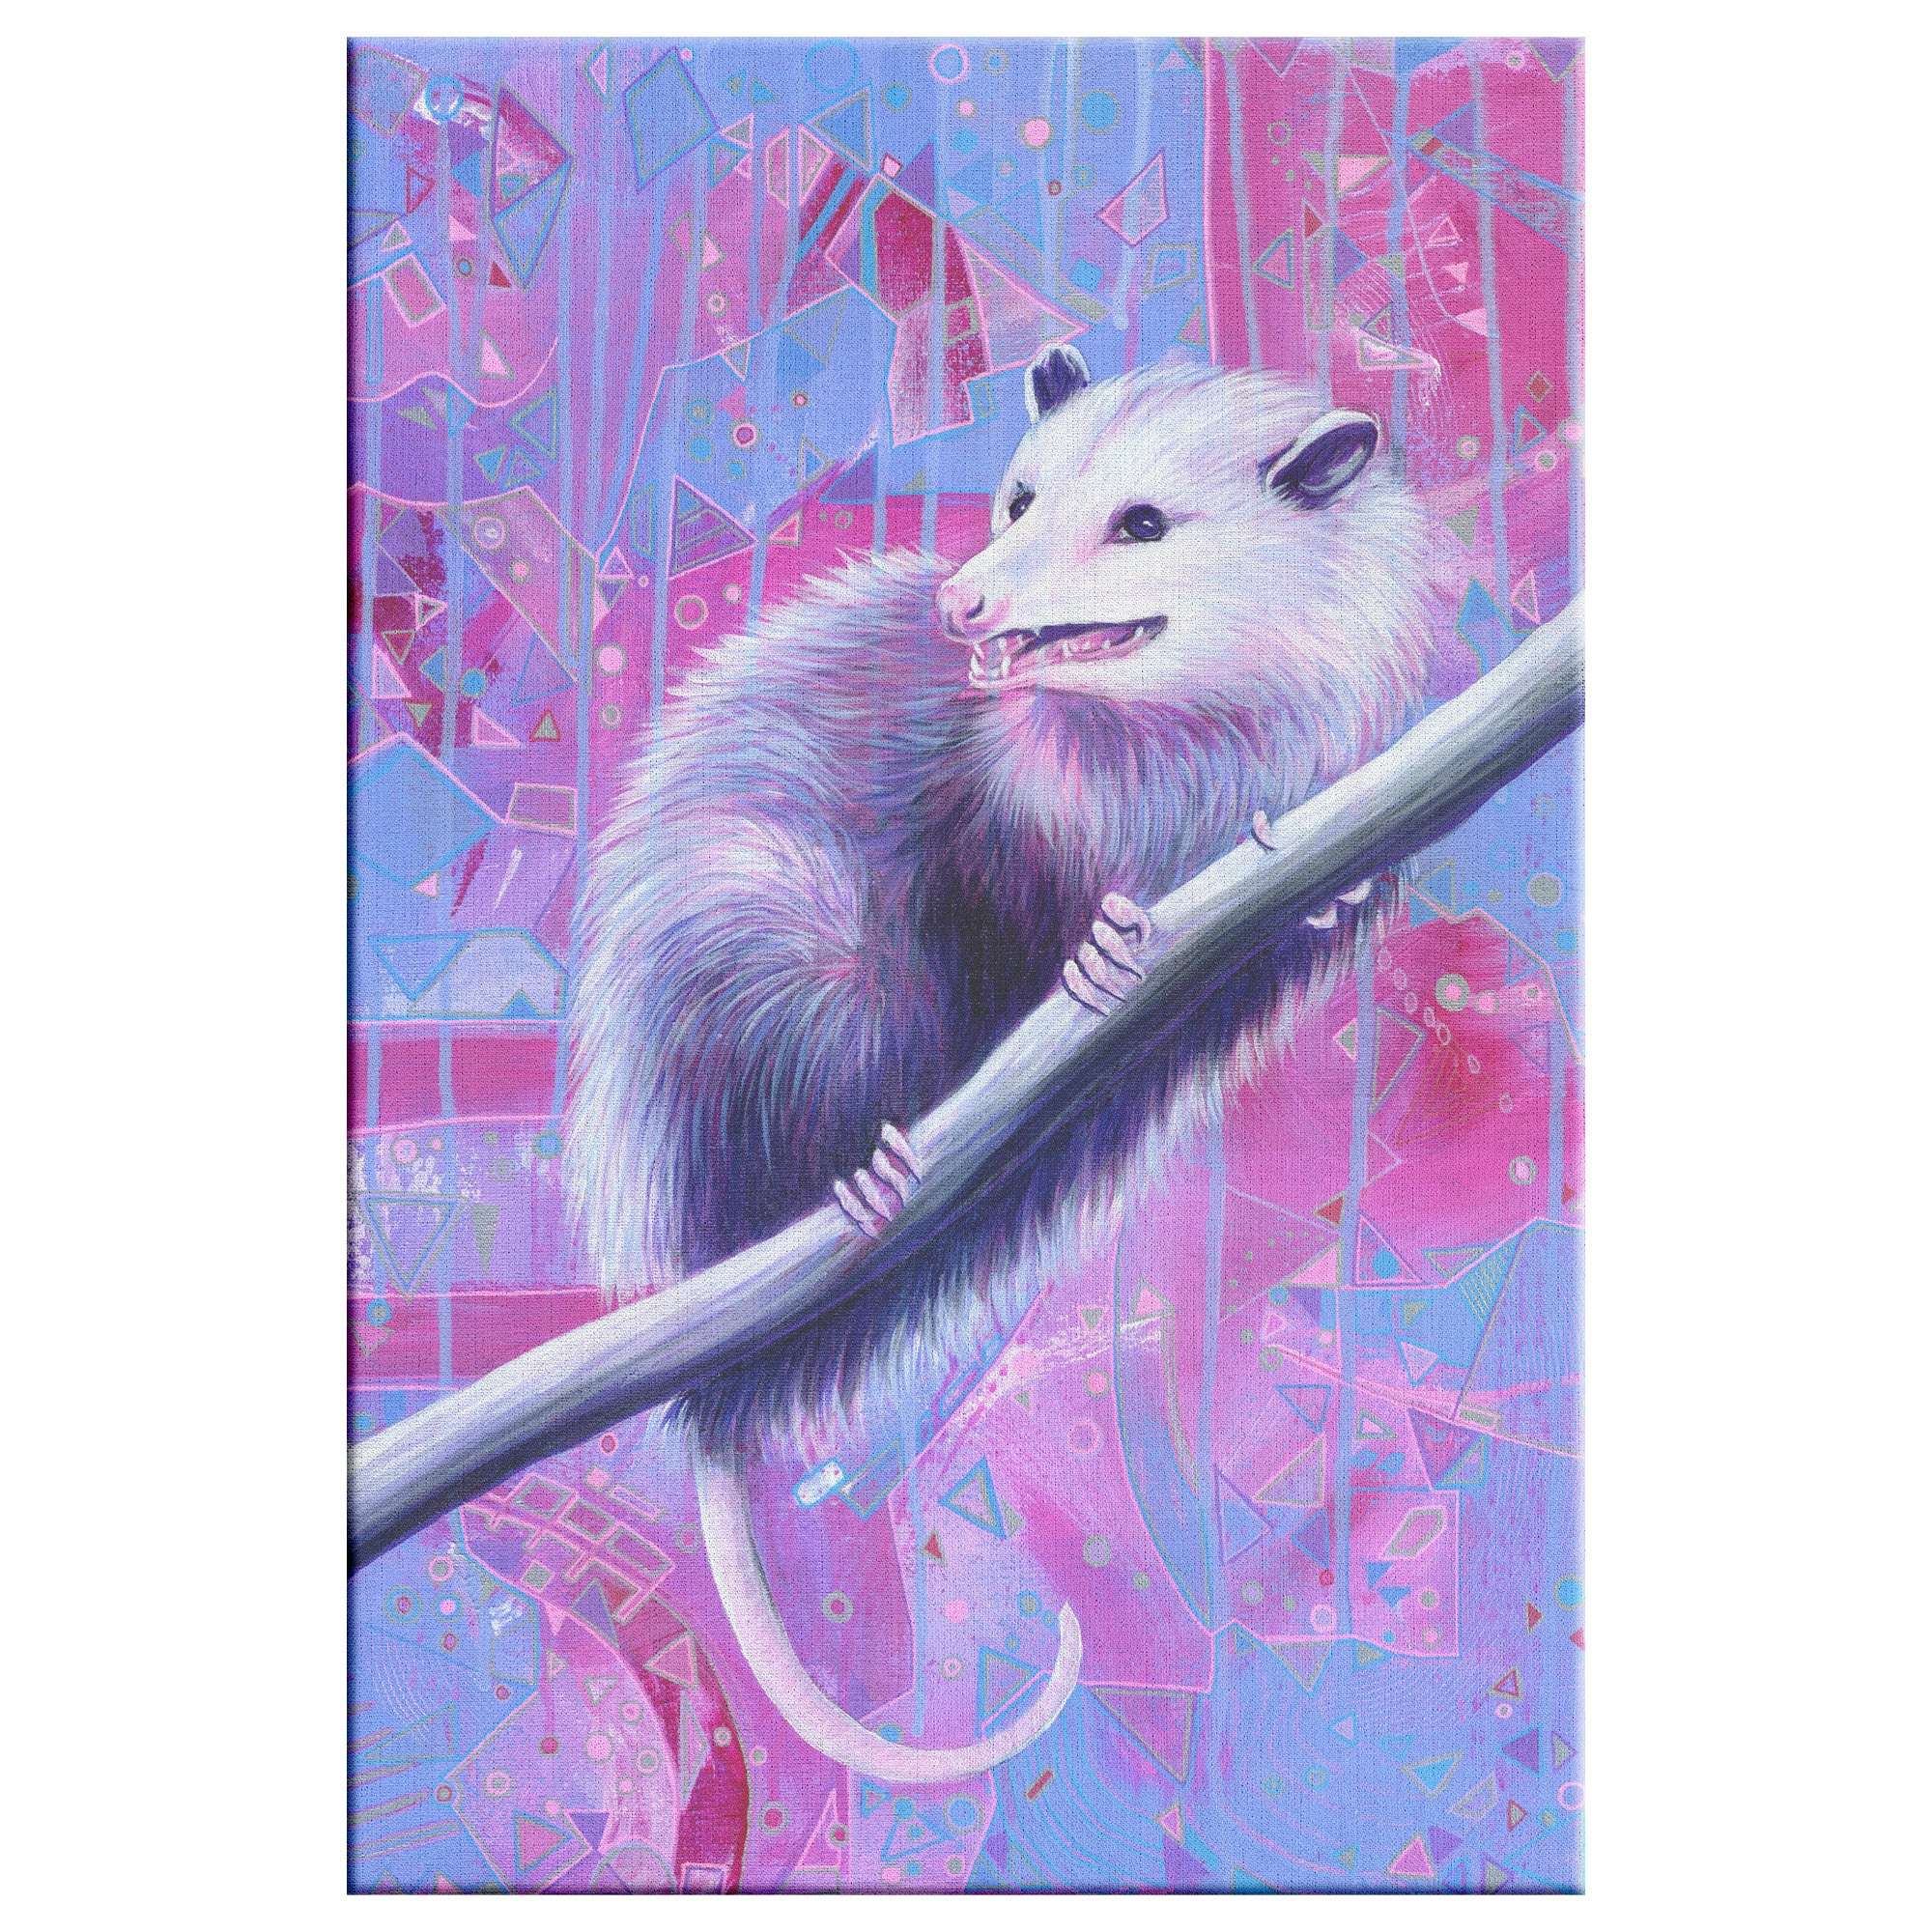 An illustration of a white opossum clutching a branch, set against a detailed pink and blue geometric background